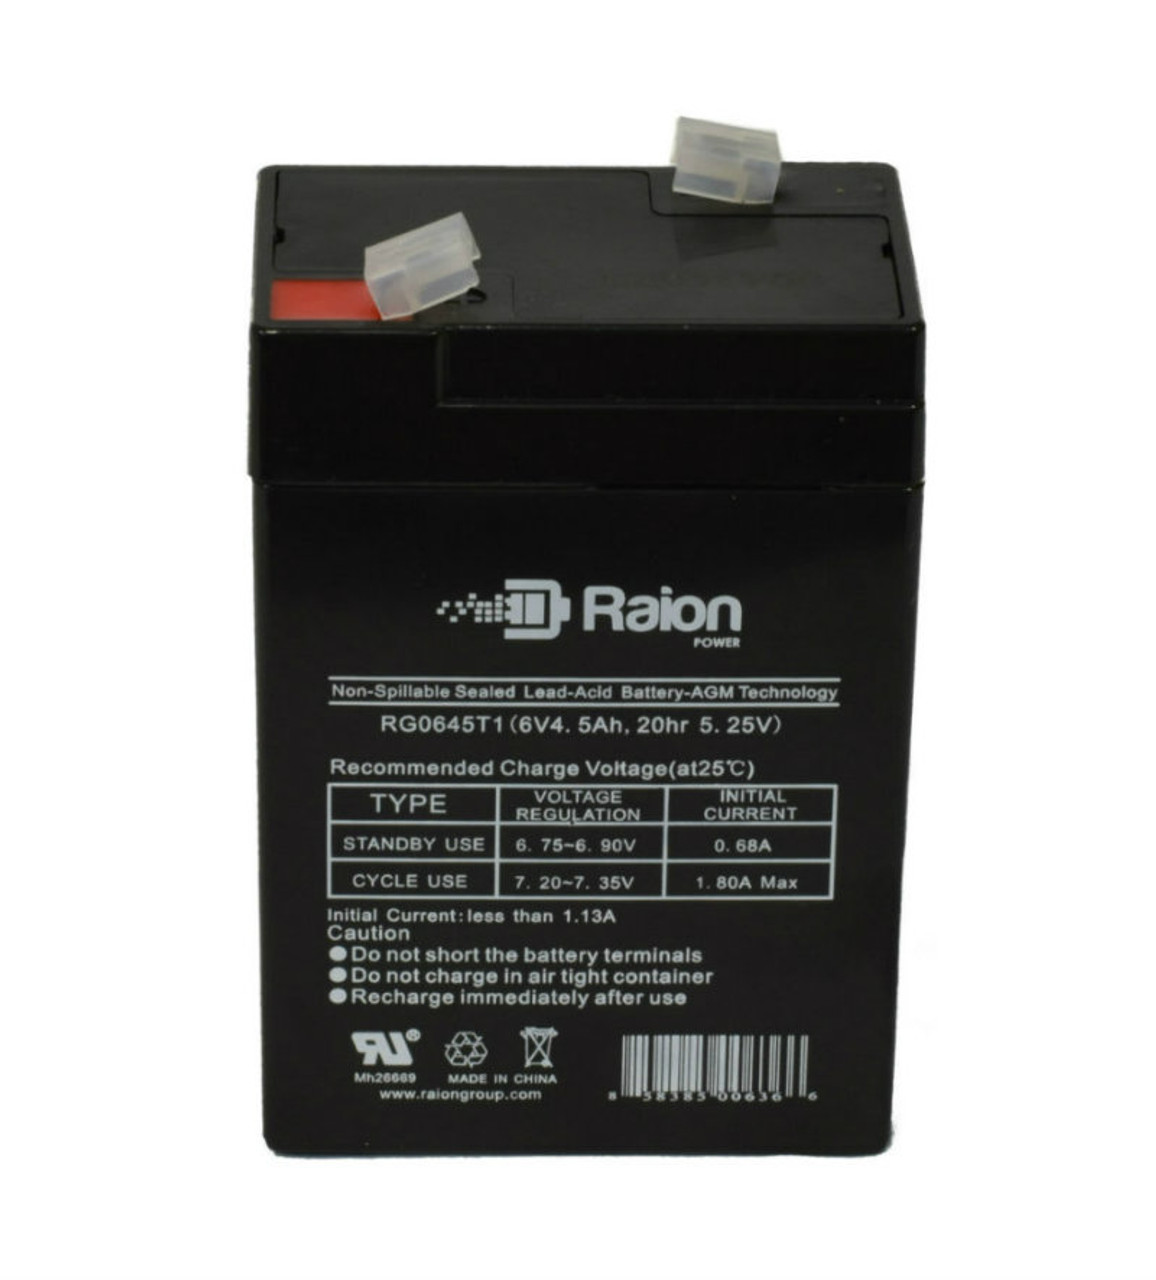 Raion Power RG0645T1 Replacement Battery Cartridge for SunStone Power SPT6-4